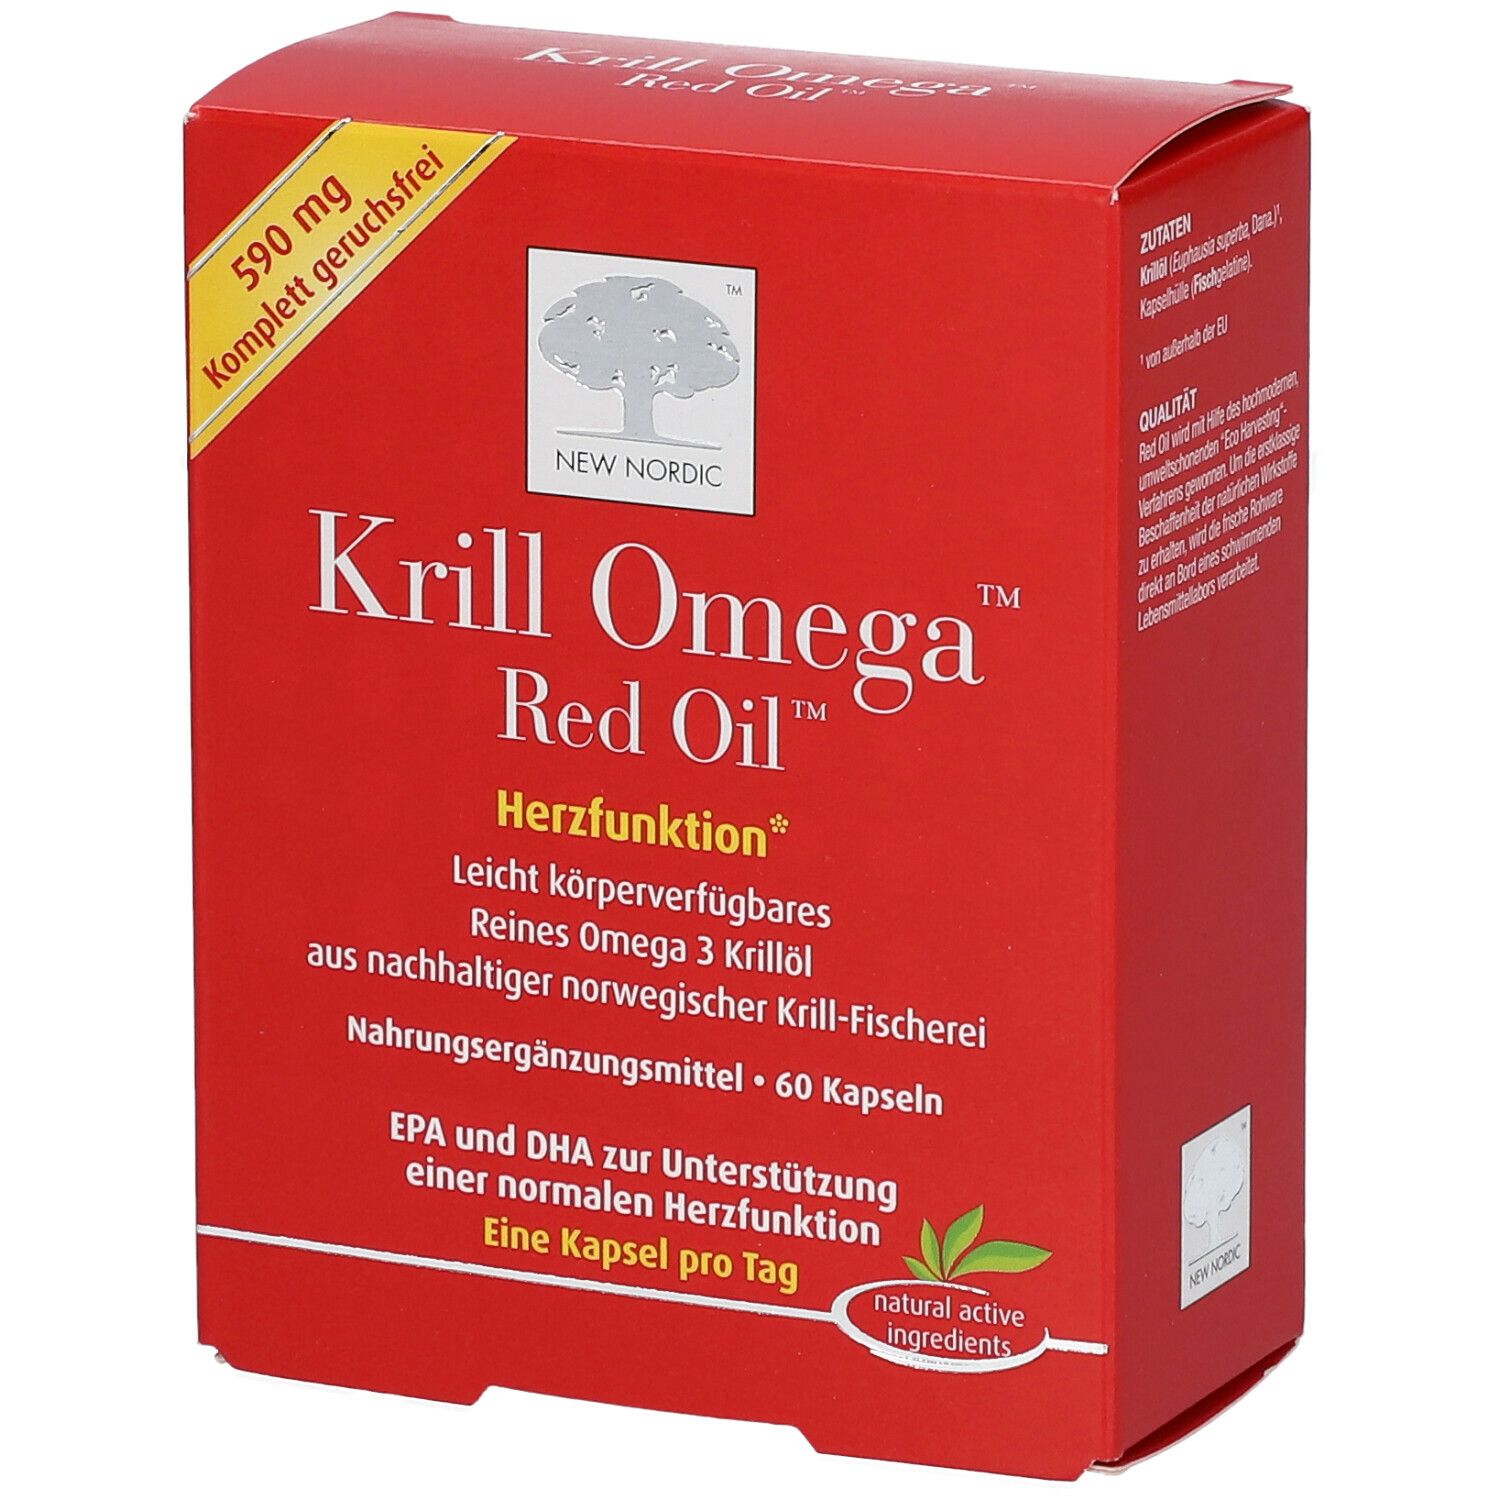 NEW NORDIC Krill Omega™ Red Oil